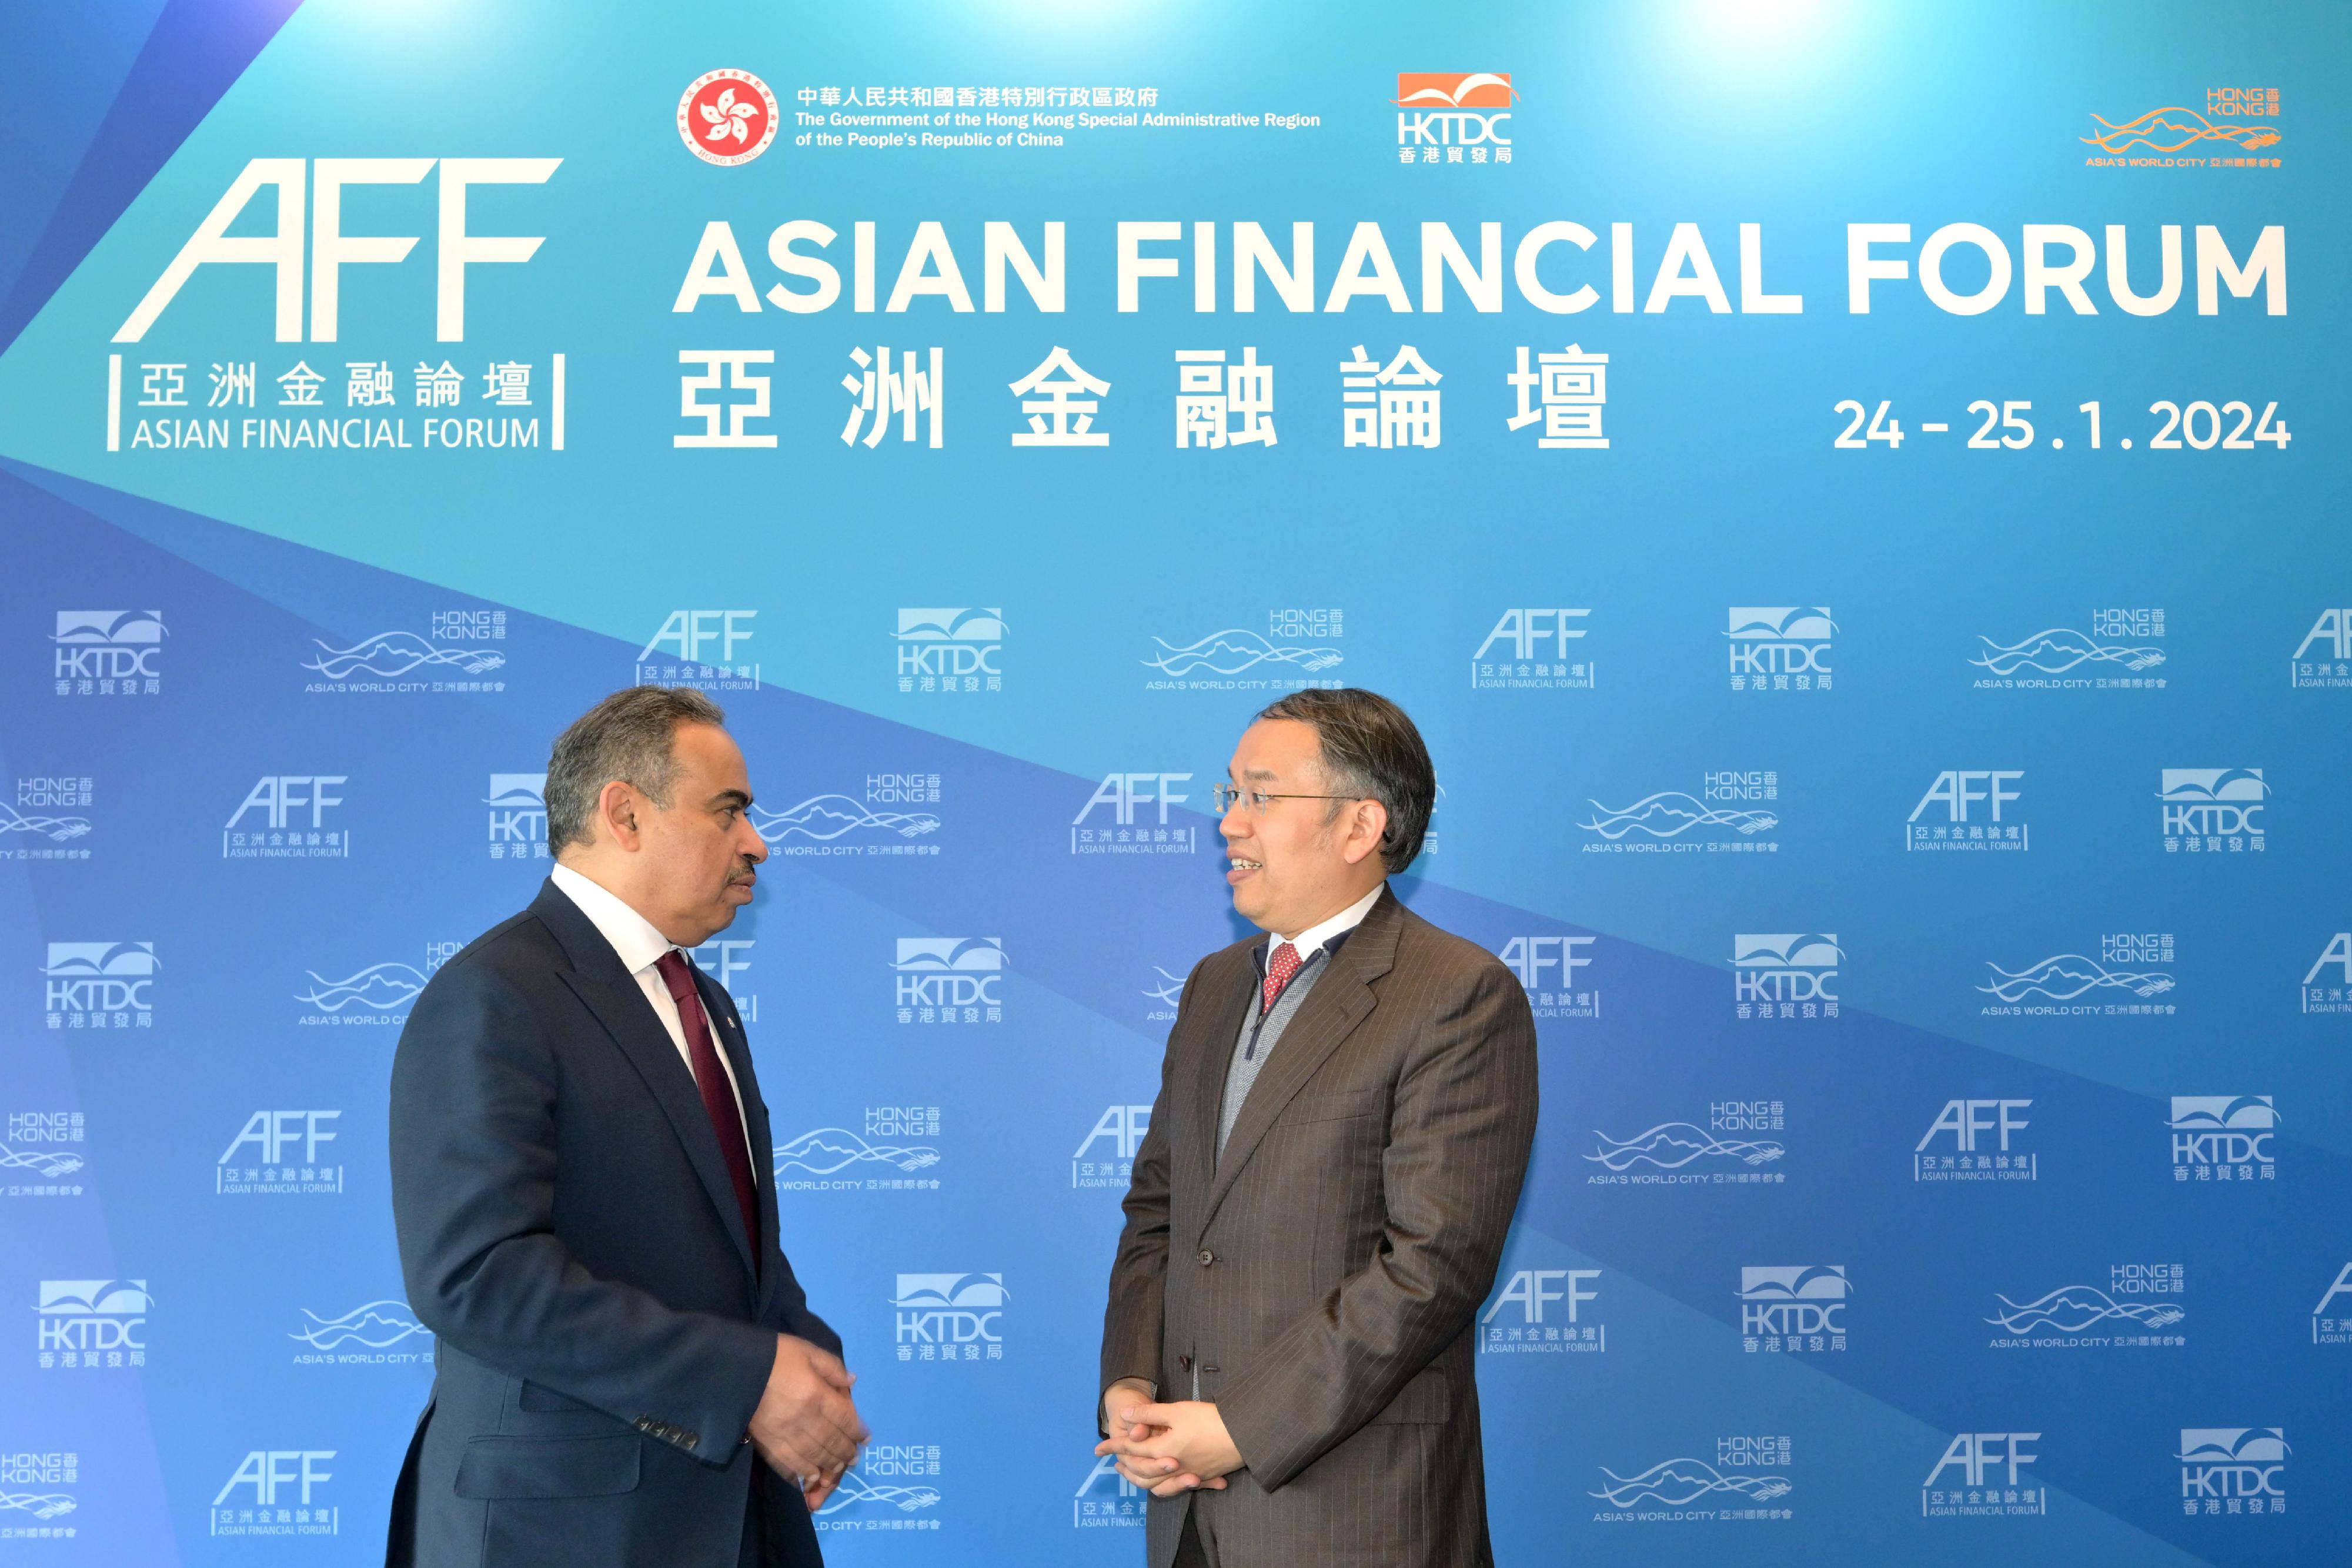 The Secretary for Financial Services and the Treasury, Mr Christopher Hui, today (January 24) held bilateral meetings with overseas senior officials and representatives from the European Commission on the sidelines of the Asian Financial Forum. Photo shows Mr Hui (right) meeting with the Minister of Finance of Qatar, Mr Ali bin Ahmed Al-Kuwari (left).